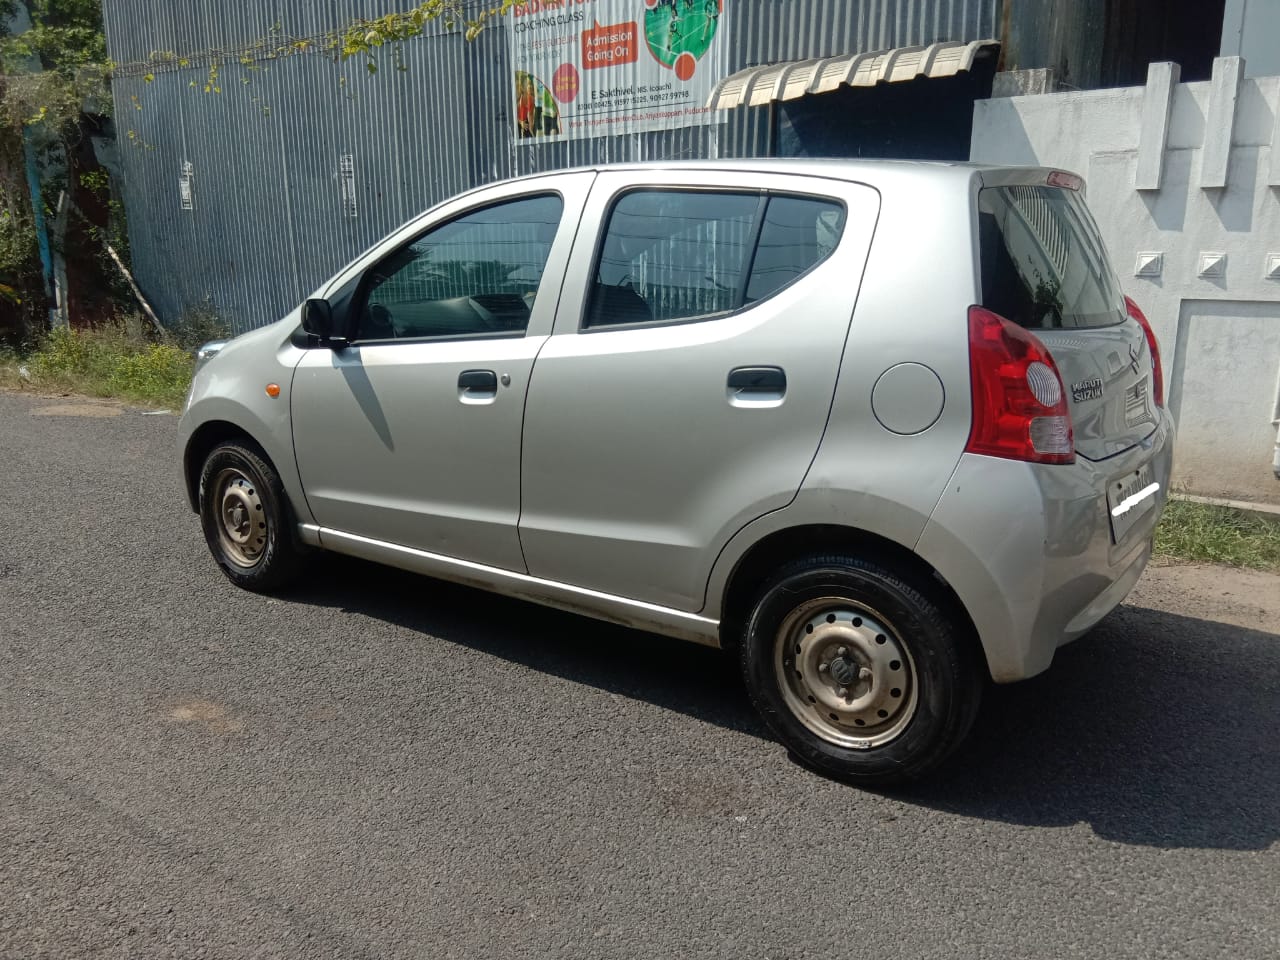 5943-for-sale-Maruthi-Suzuki-A-Star-Petrol-First-Owner-2012-TN-registered-rs-195000